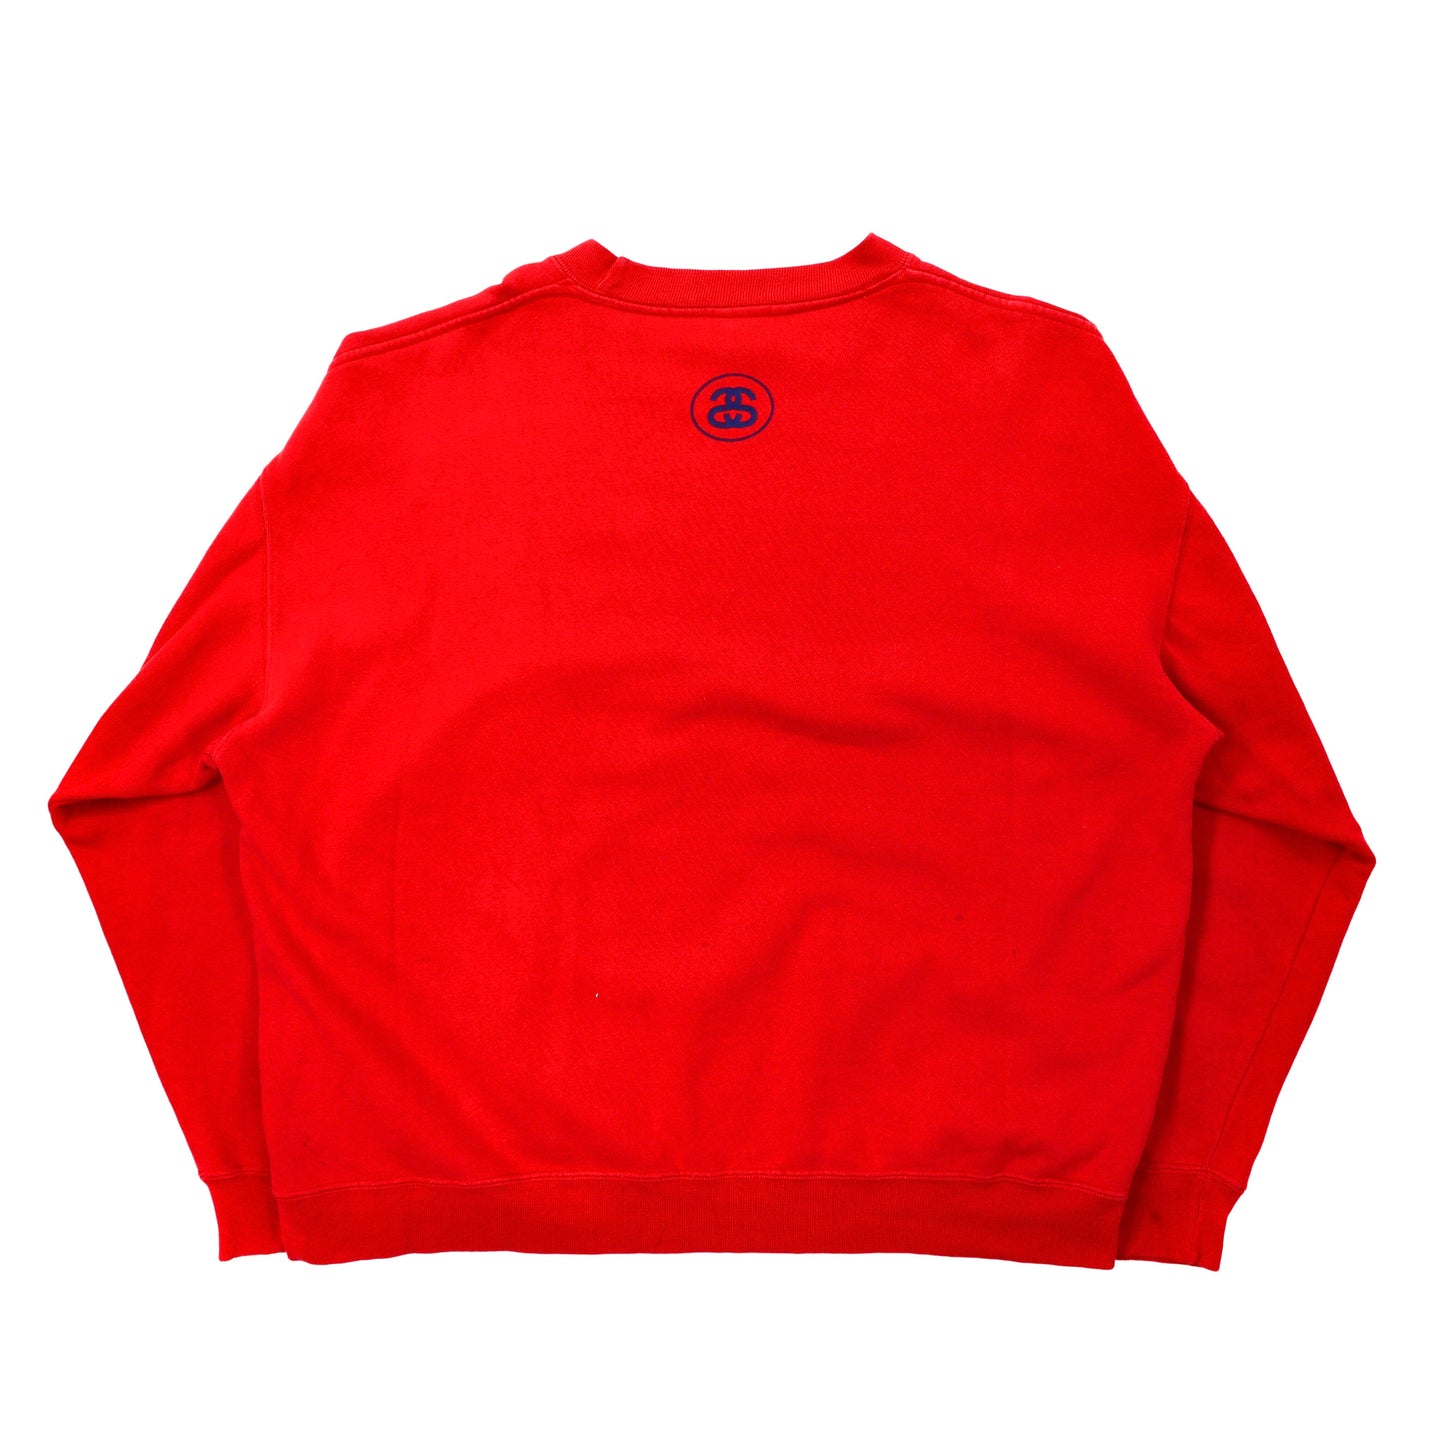 Stussy Sweatshirt L Red No. 4 Logo Print Made in USA Backed Silver